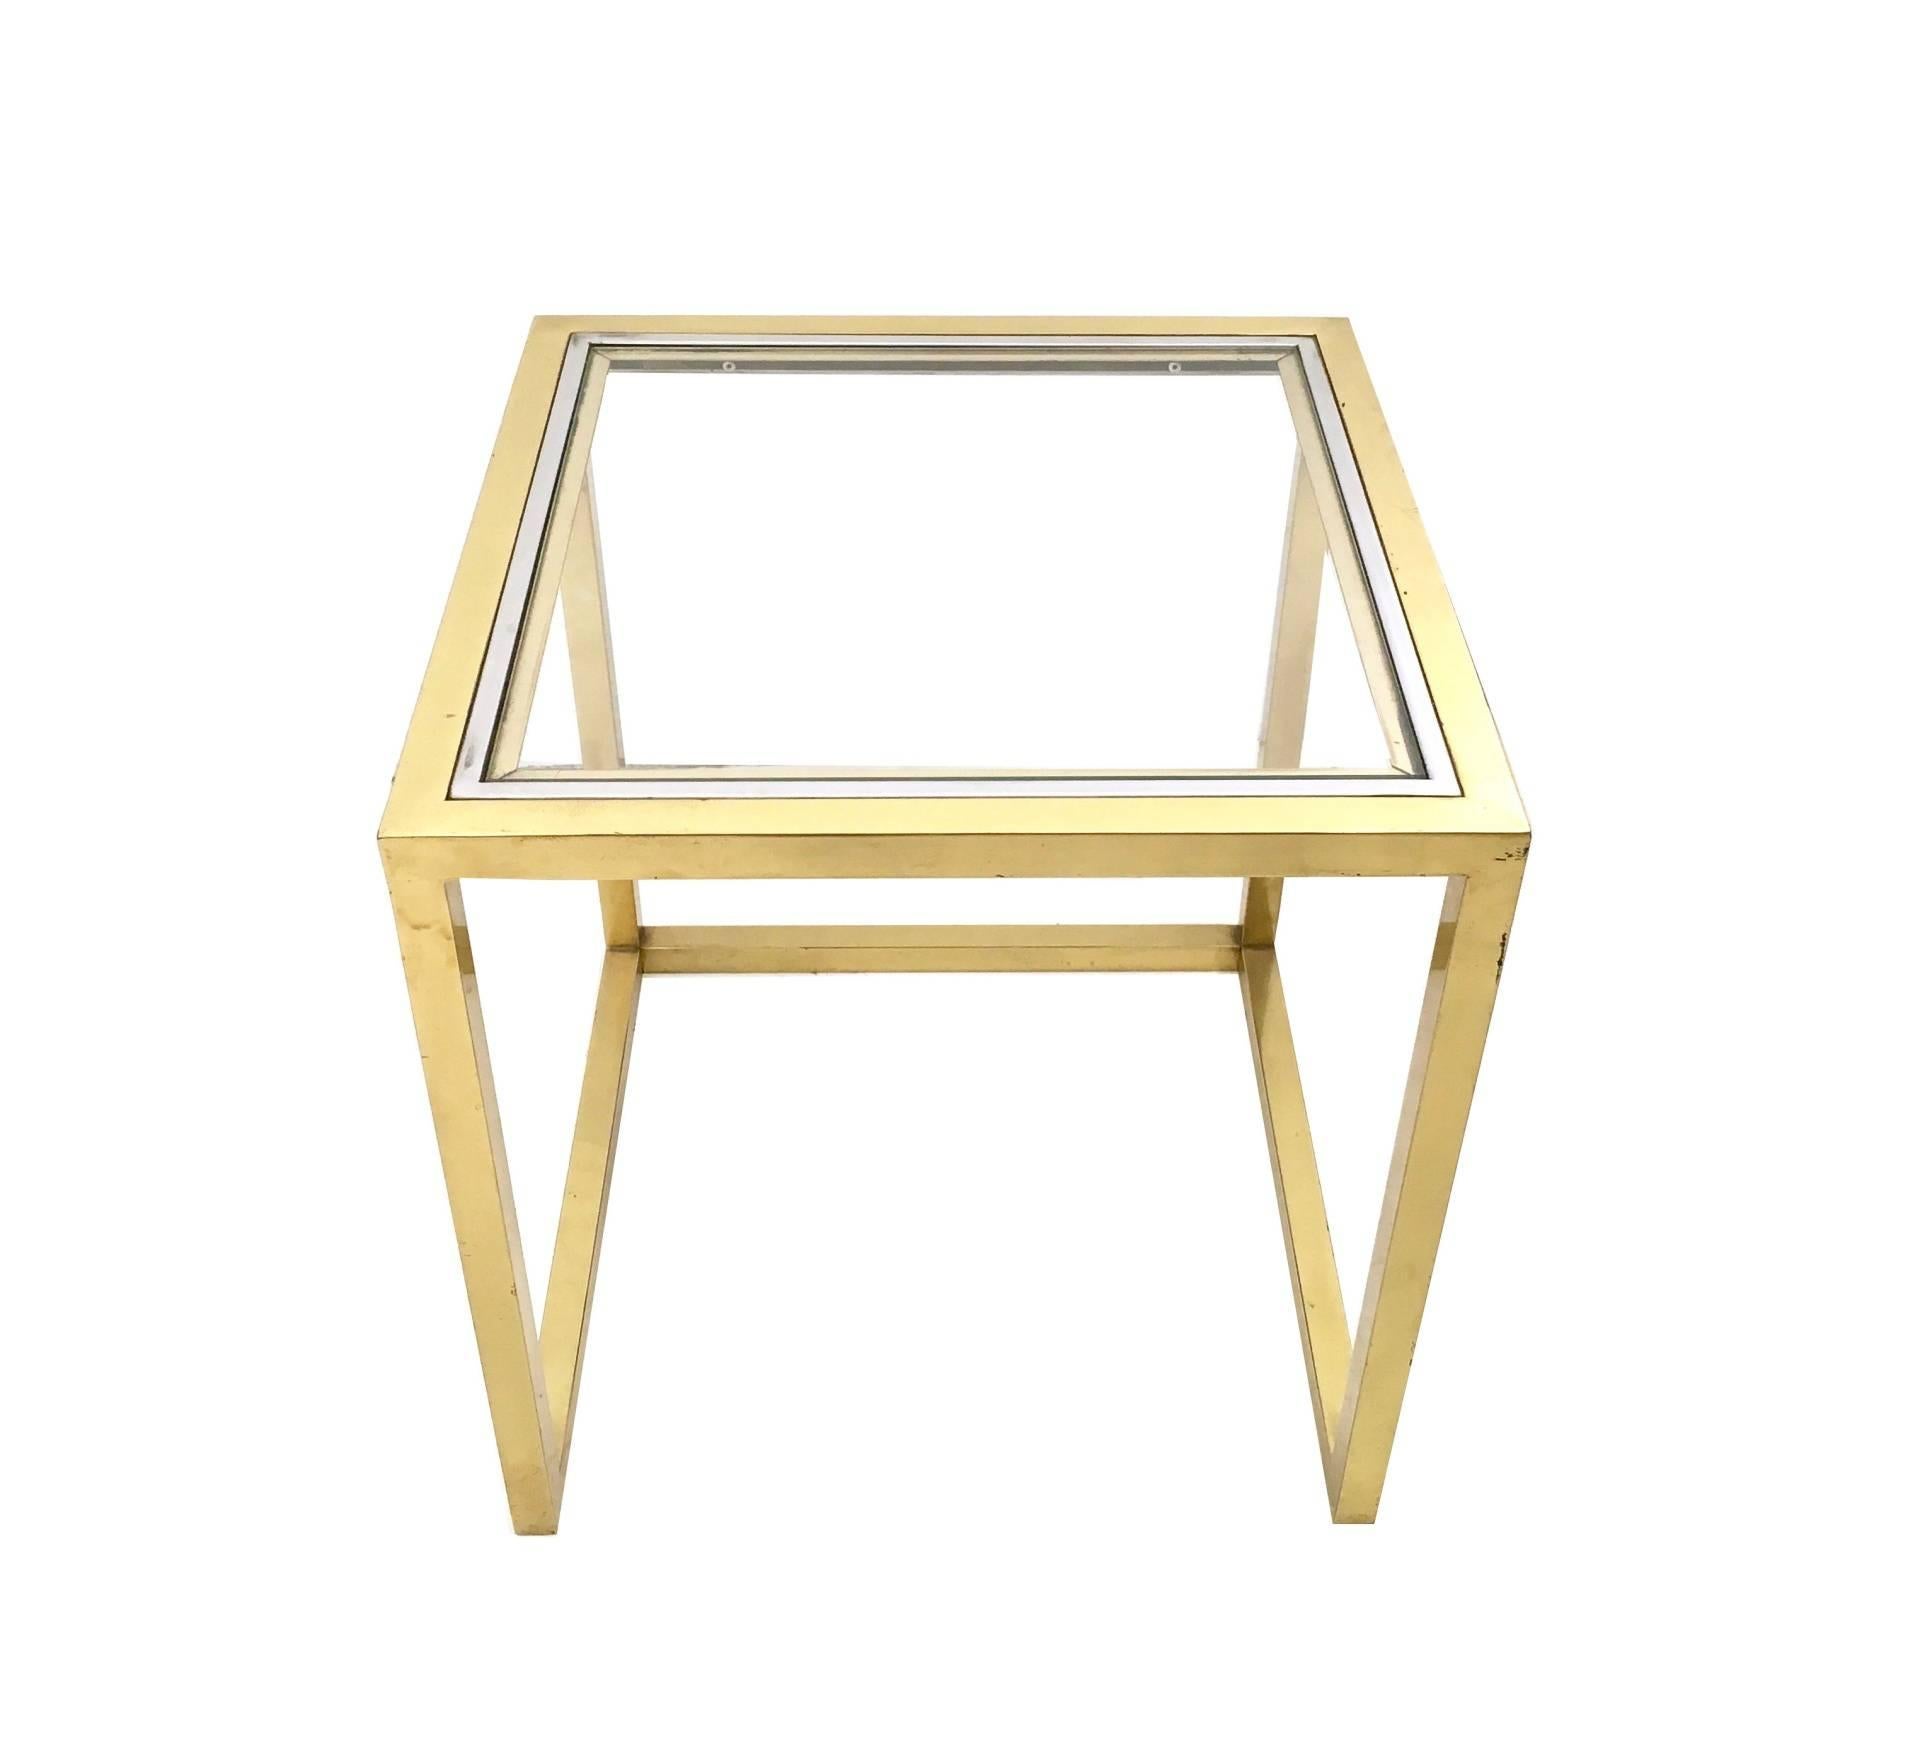 Set of Postmodern Brass, Steel and Glass Nesting Tables by Romeo Rega, Italy In Excellent Condition For Sale In Bresso, Lombardy